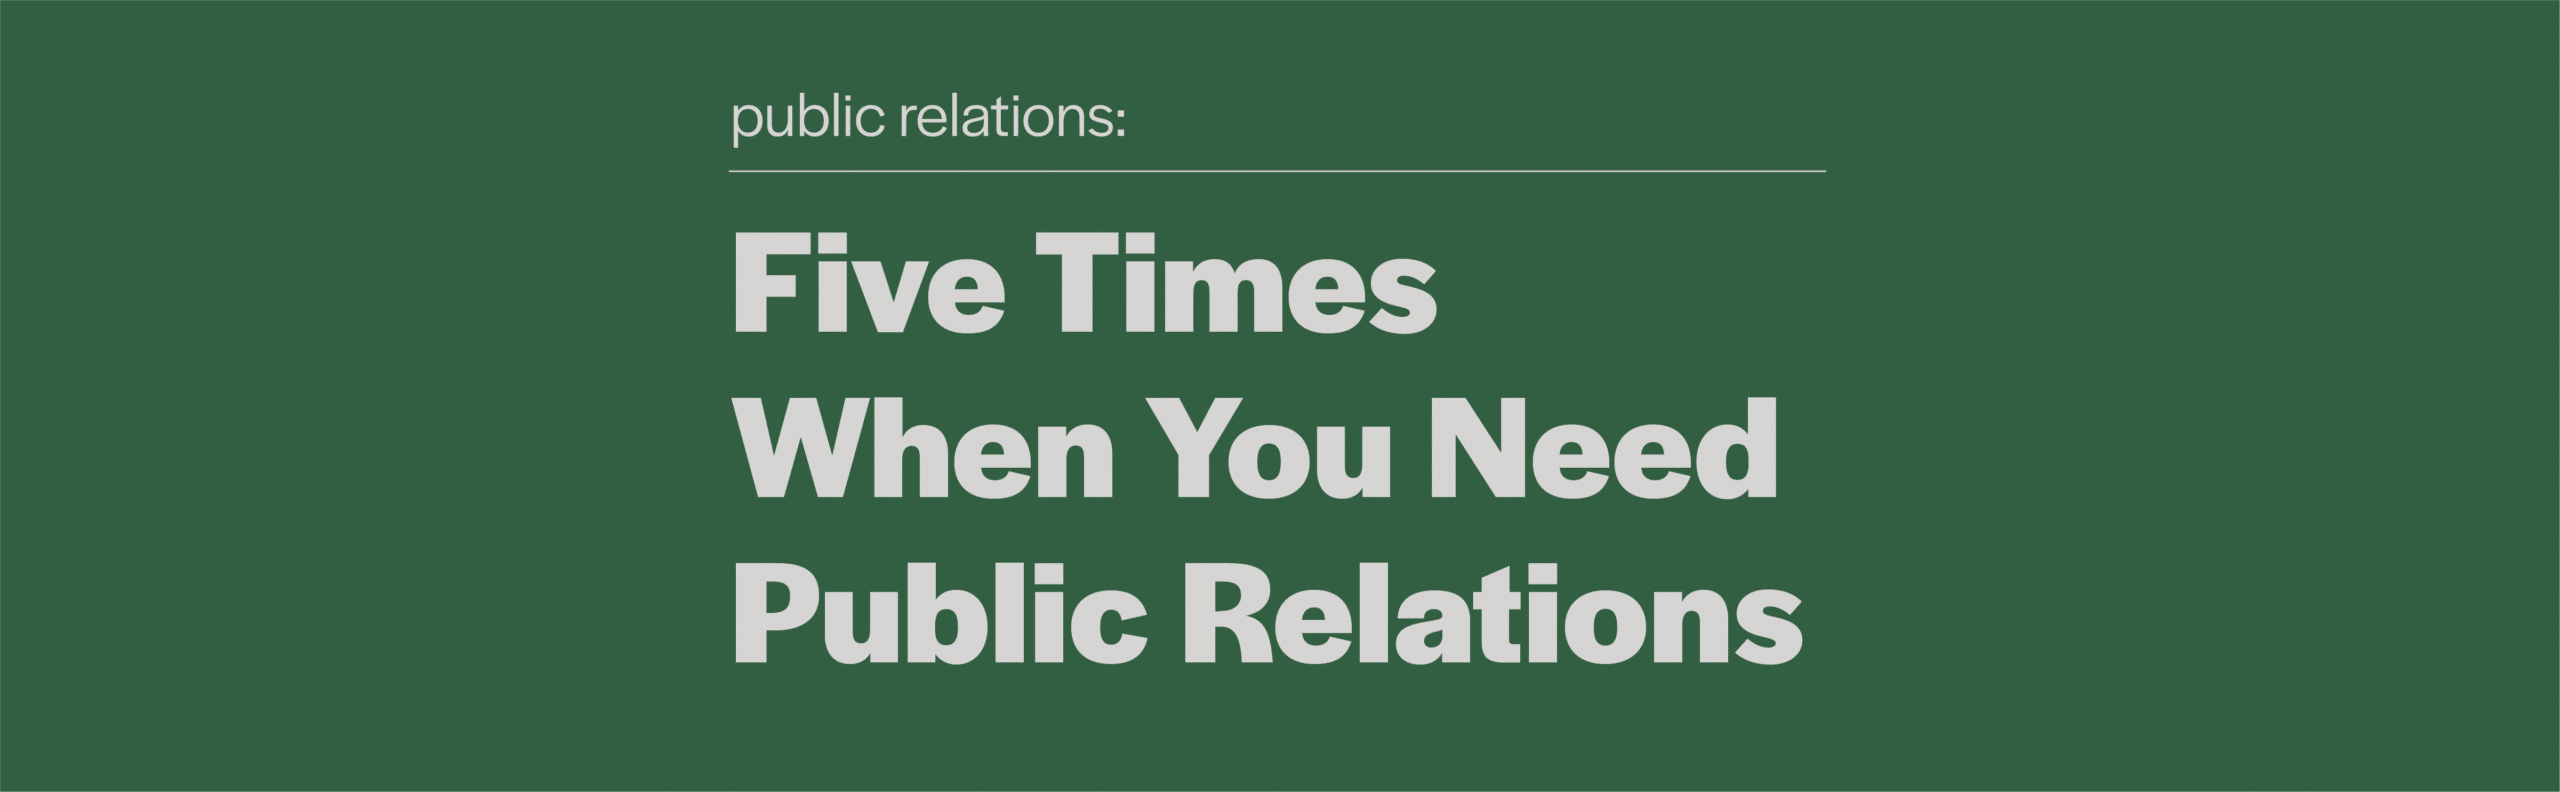 Five Times When You Need Public Relations